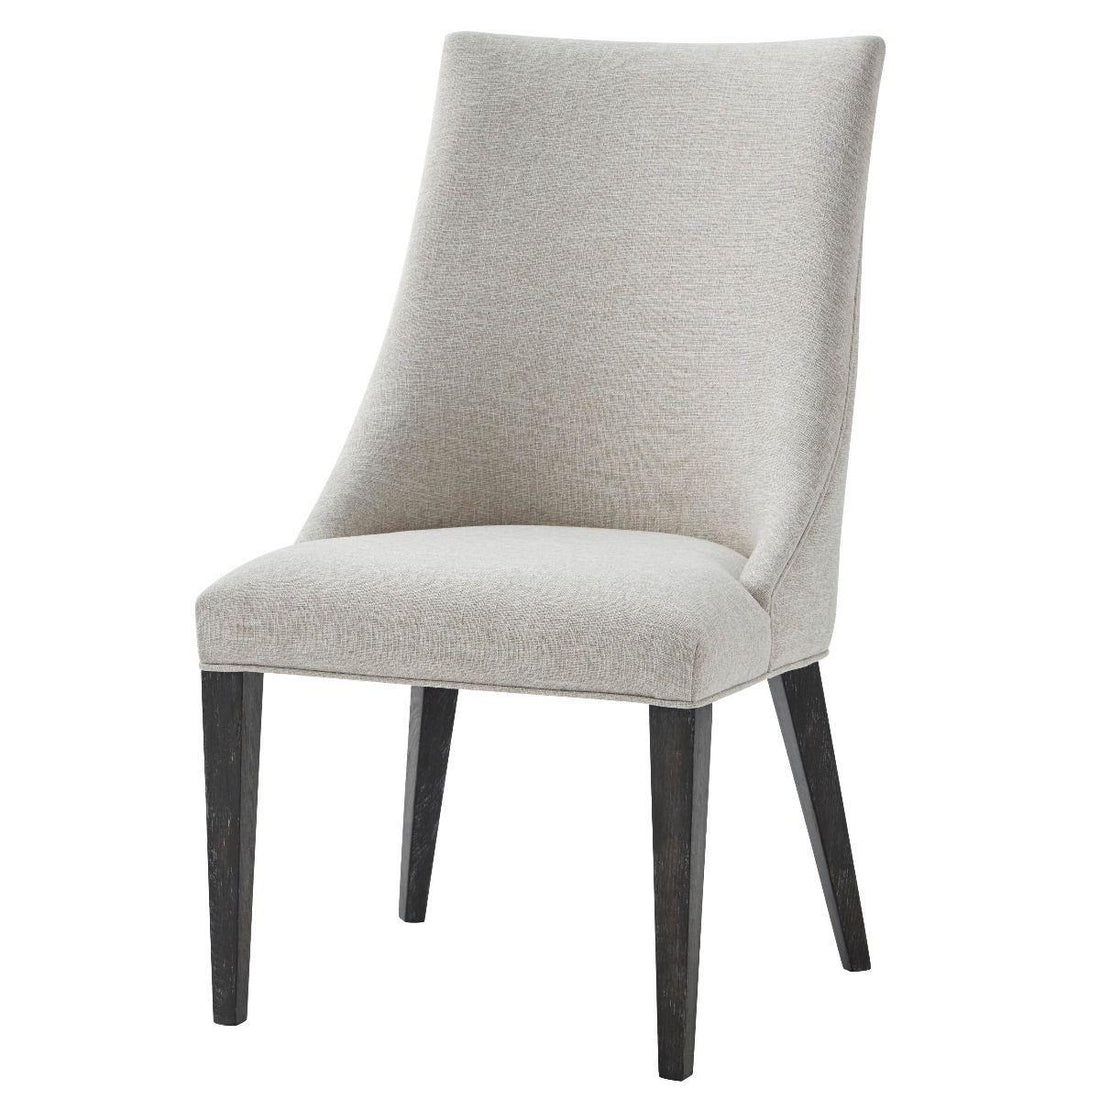 TA Studio Adele Neutral Dining Chair in Matrix Marble